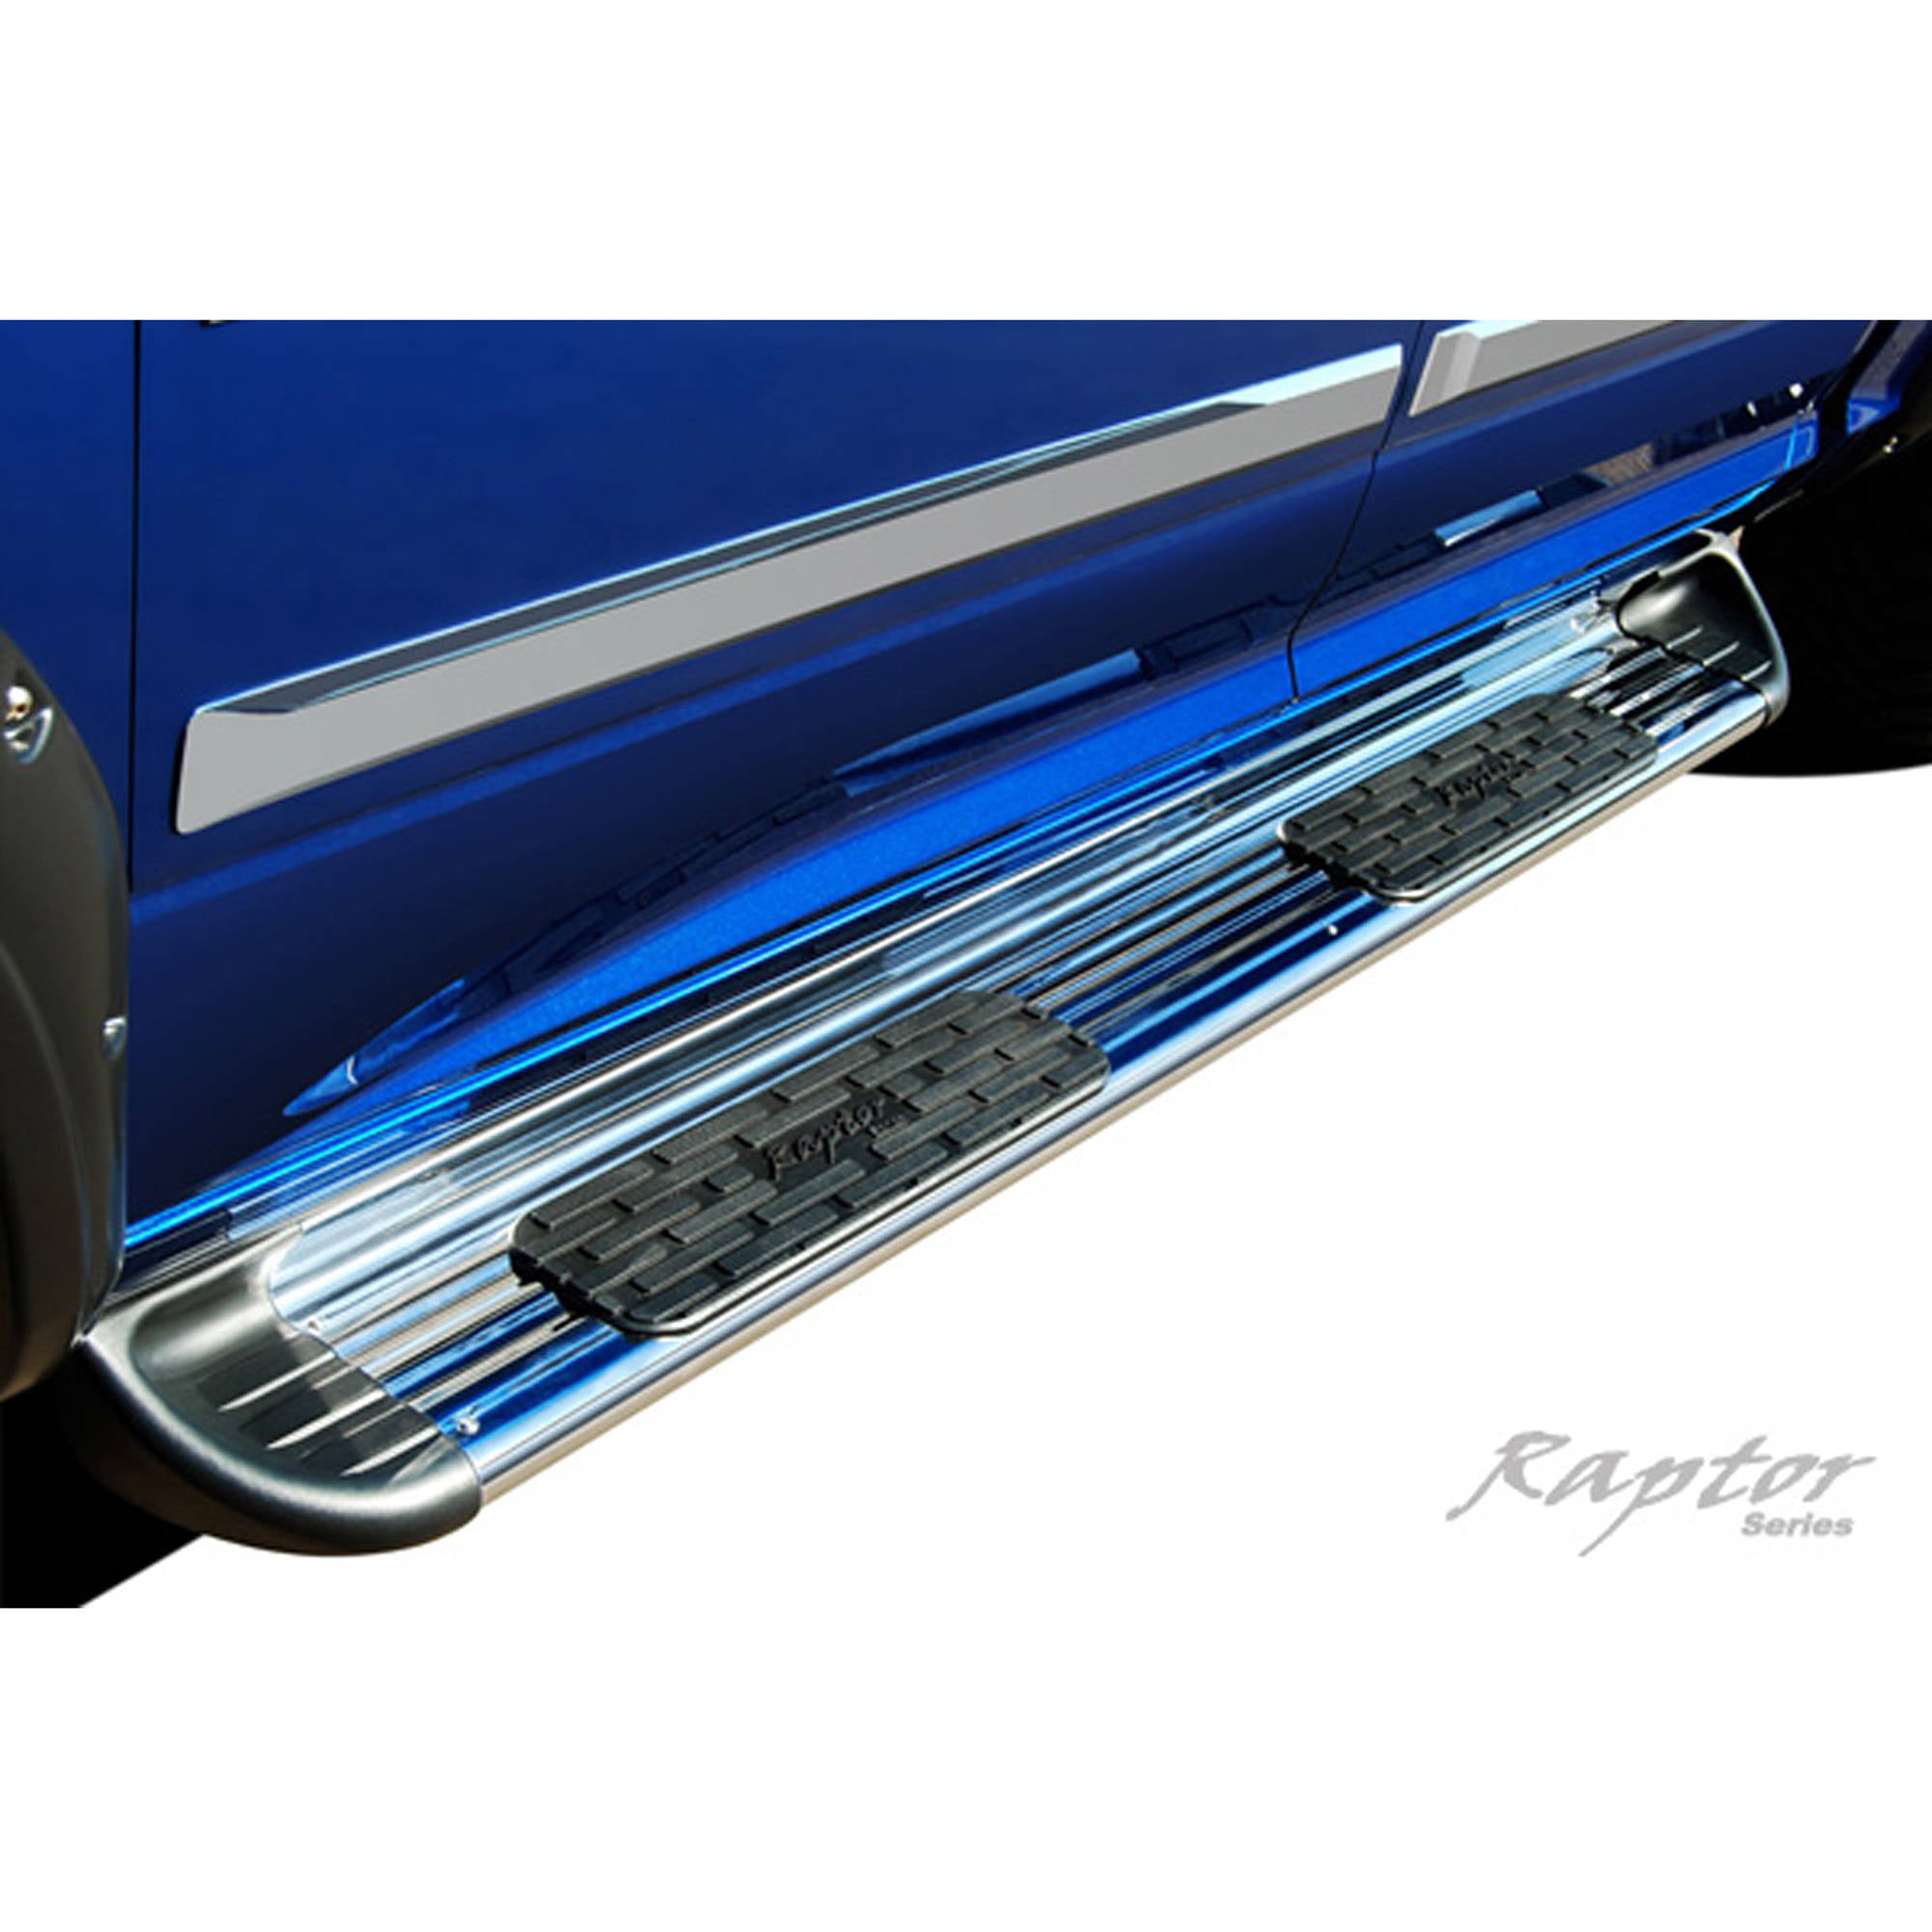 Raptor Series 14-15 Chevy Silverado 1500/2500/3500 Double Cab 7" Running Board, Stainless Steel Stainless Steel Running Boards For Chevy Silverado